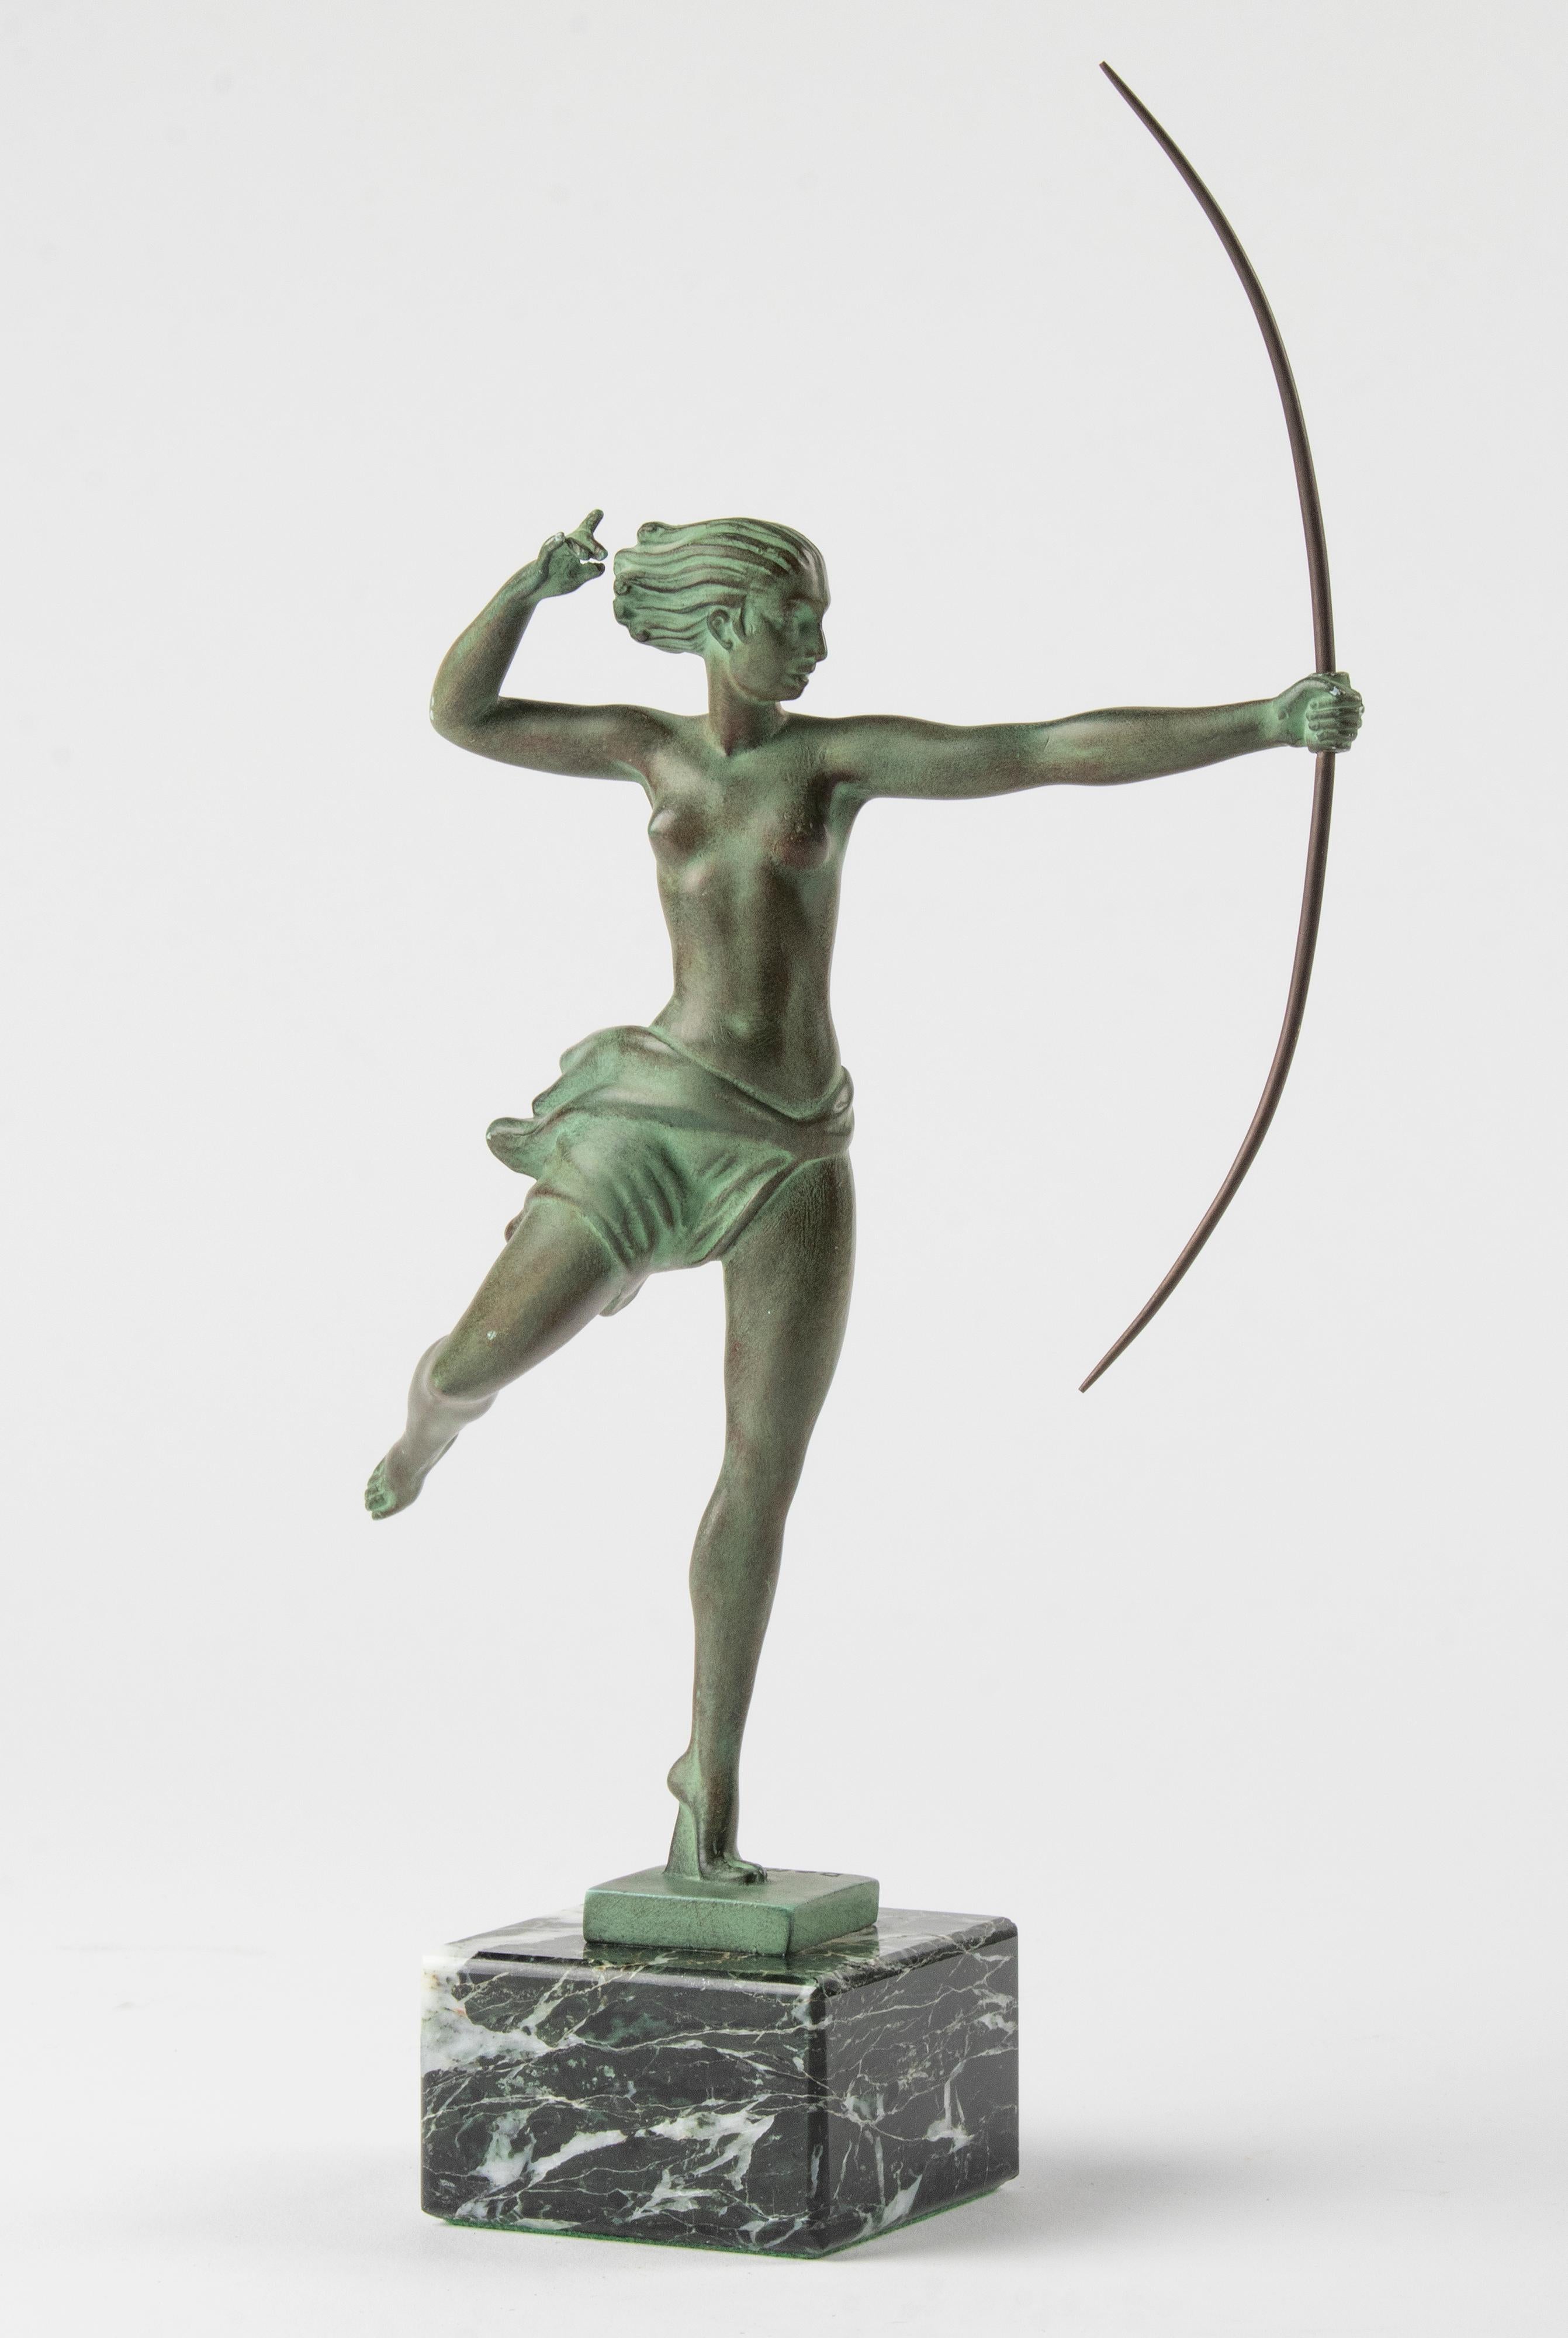 Early 20th Century 1930's French Art Deco Sculpture by Jean de MarCo from Studio Max Le Verrier